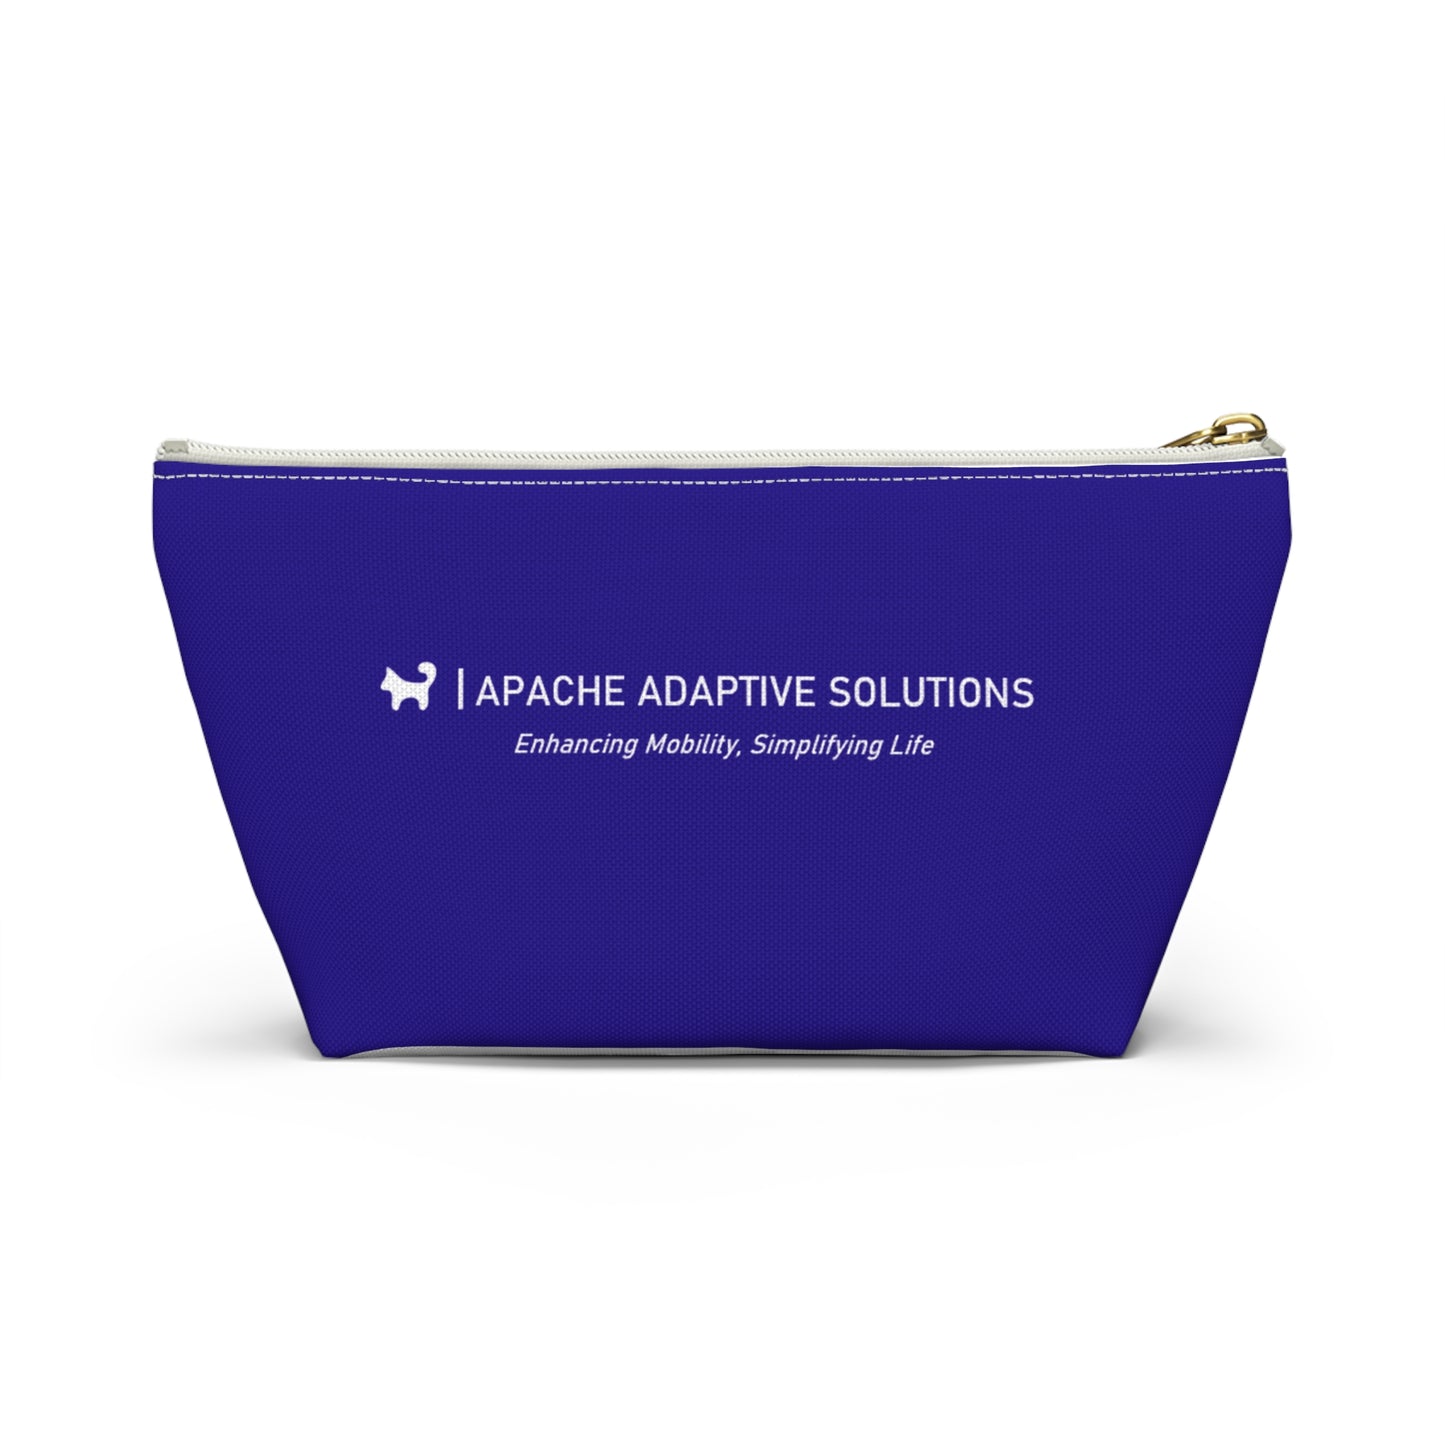 Accessory Pouch back with slogan "apache adaptive solutions, enhancing mobility, simplifying life."